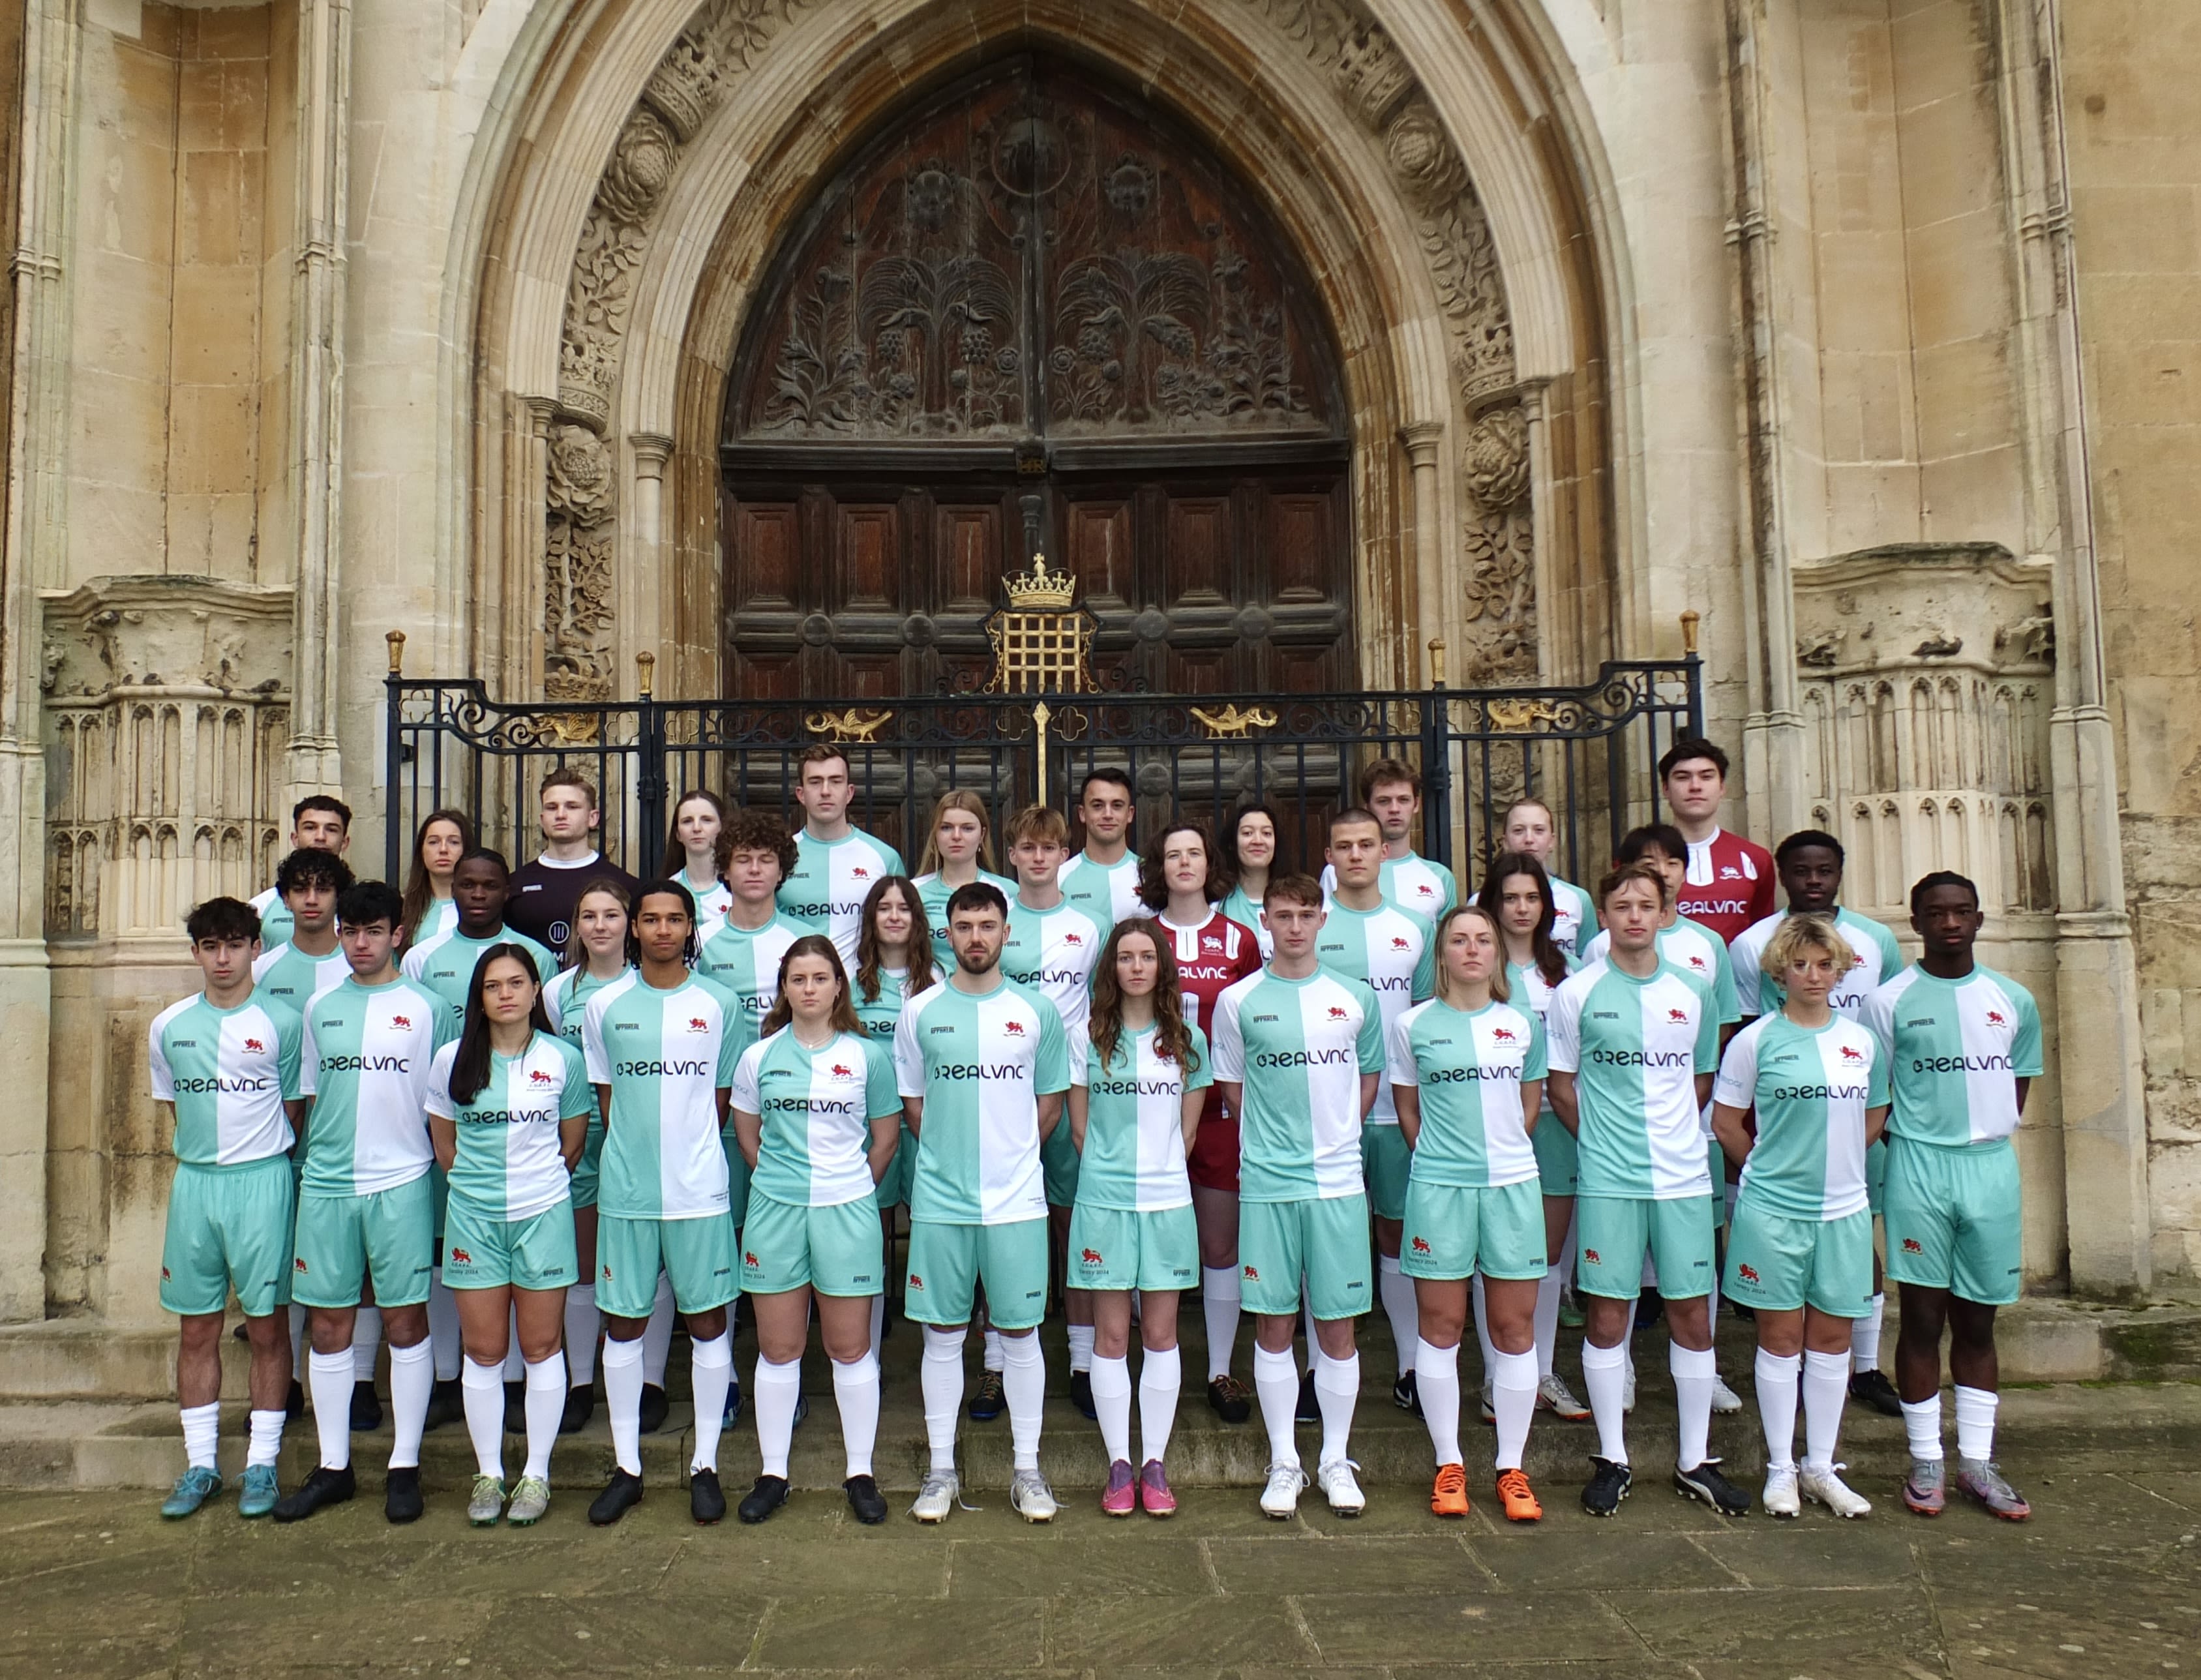 The men's and women's football teams combined, standing in their football kit